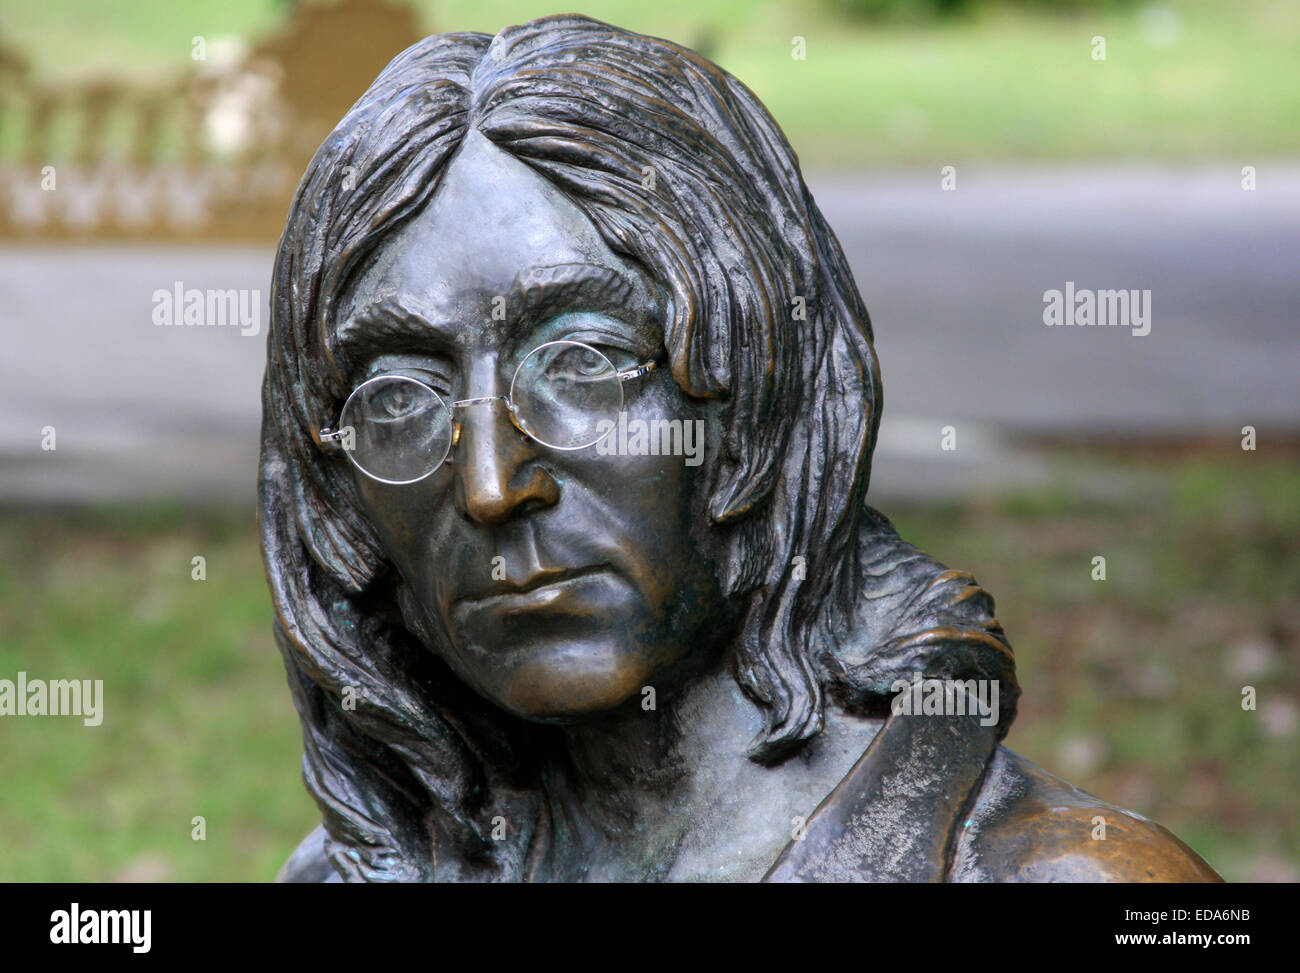 Sculpture of John Lennon sitting on a bench in John Lennon Park, located in the Vedado district of Havana, Cuba Stock Photo